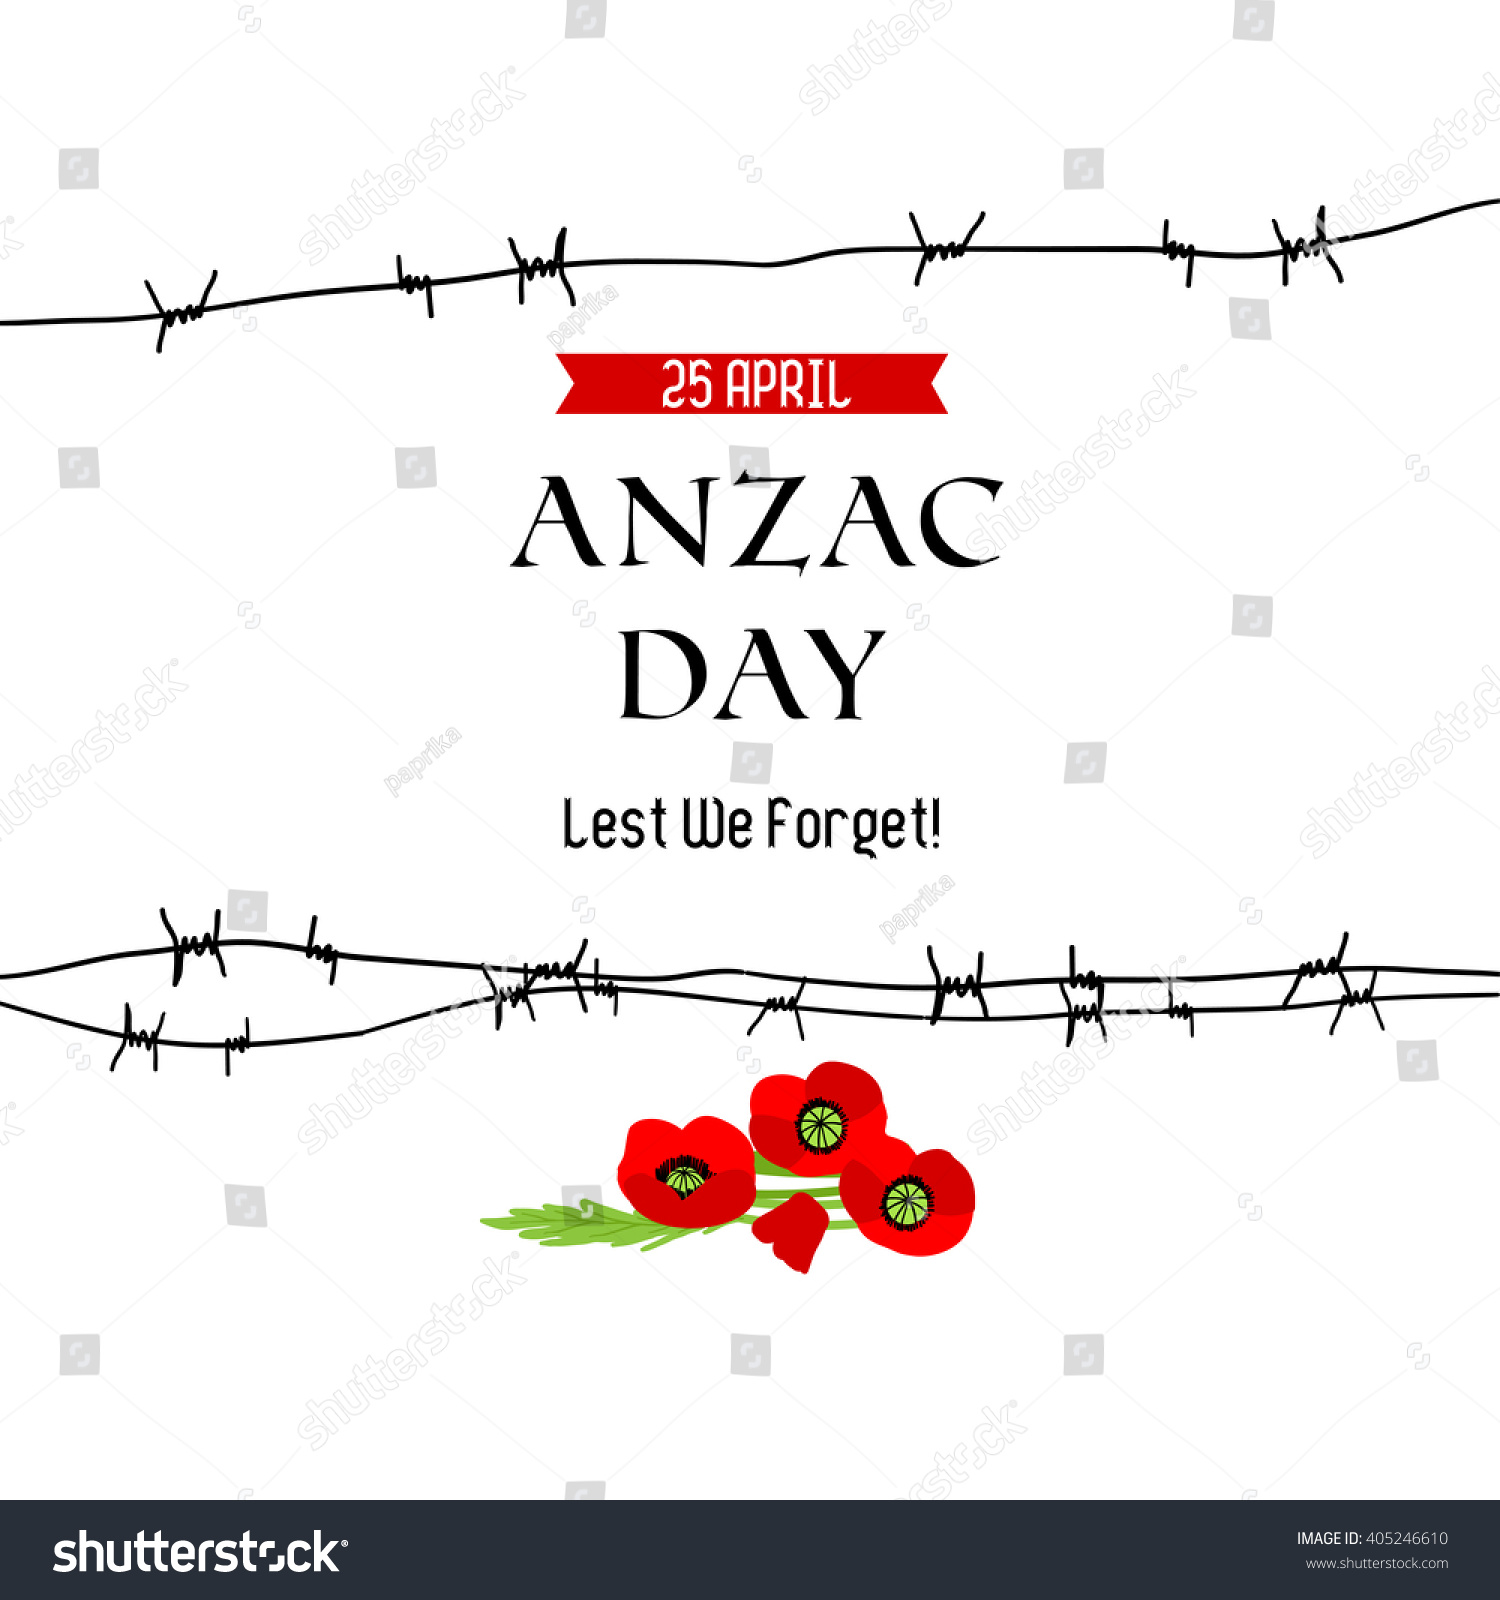 SVG of Anzac day background for design banner,ticket, leaflet and so on.Template page. svg